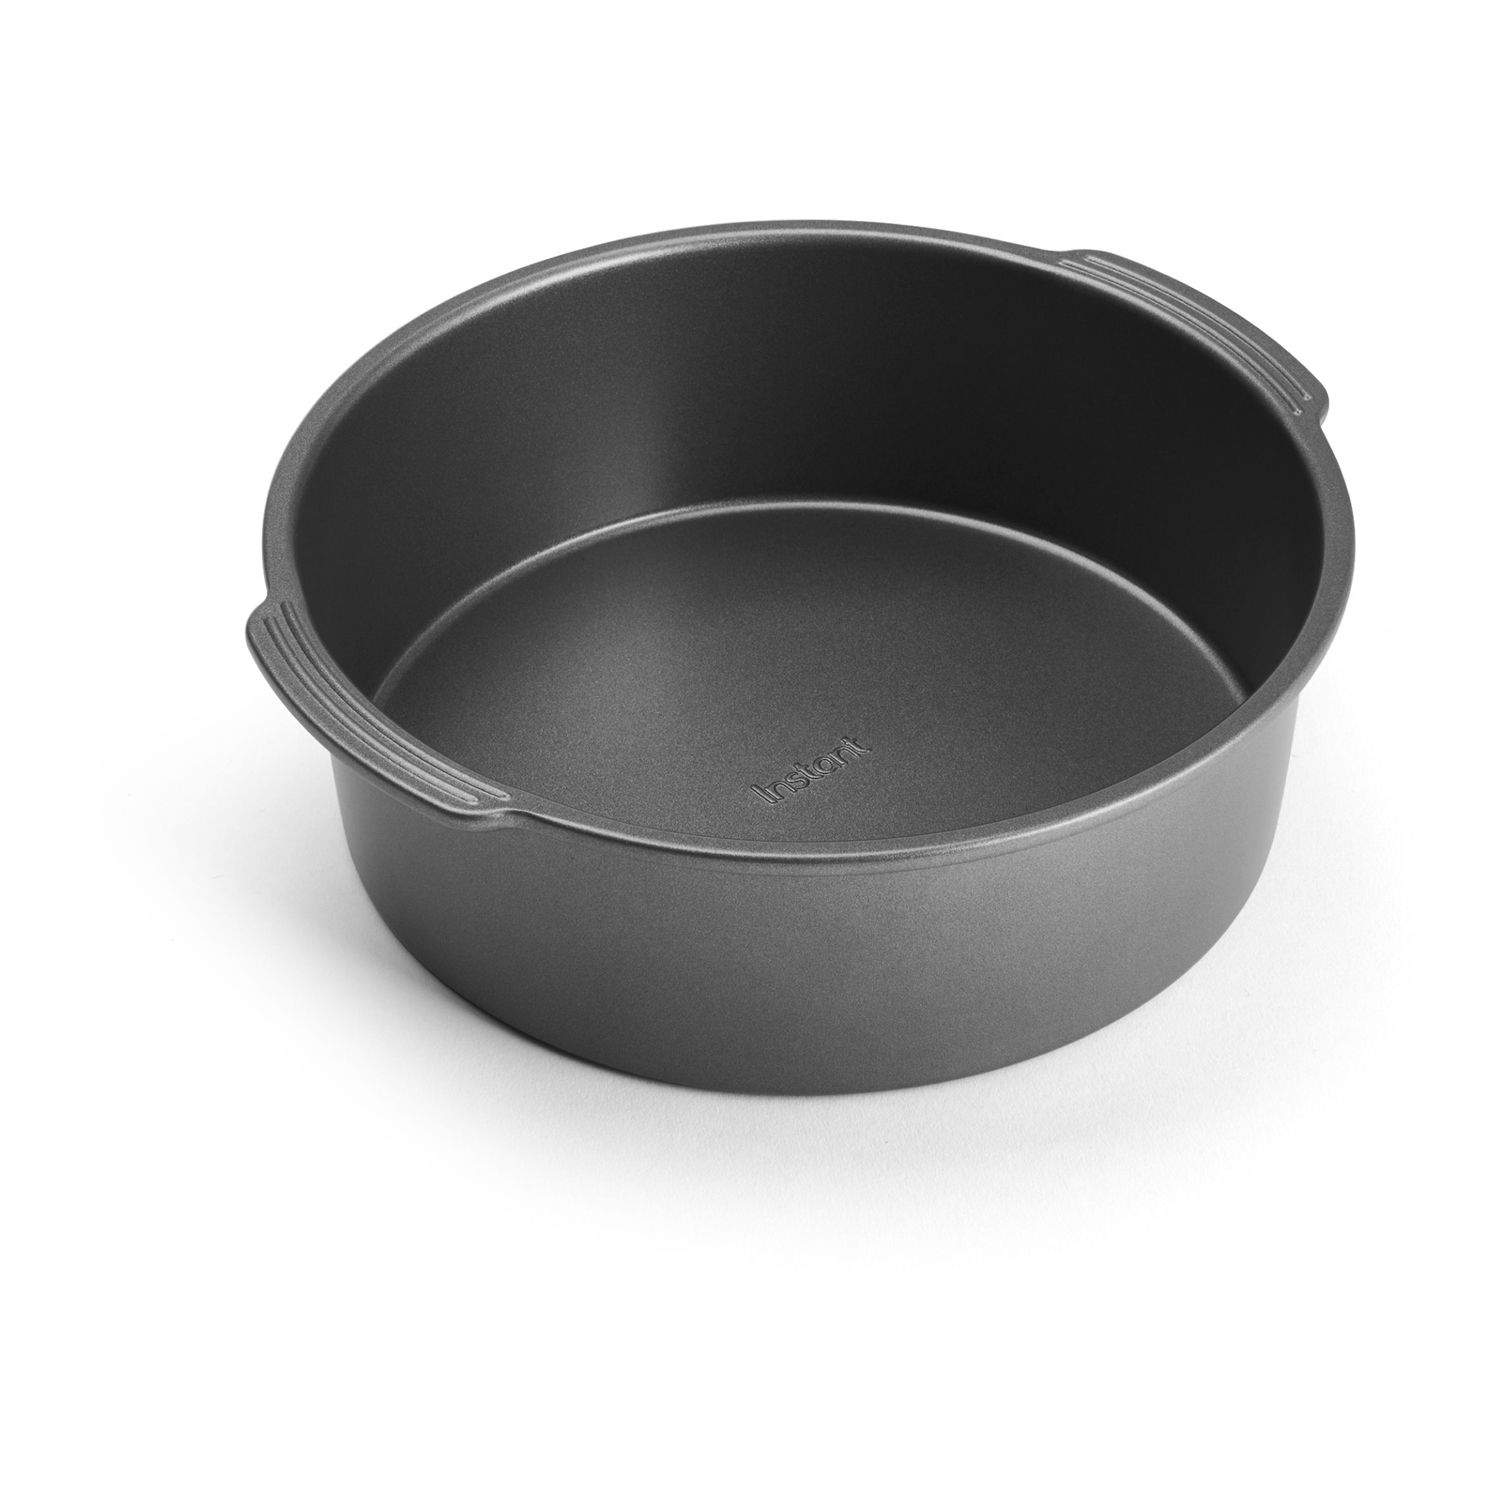 Bruntmor 8-Wedge Cast Iron Biscuit Pan, Non-Stick Baking Tool for